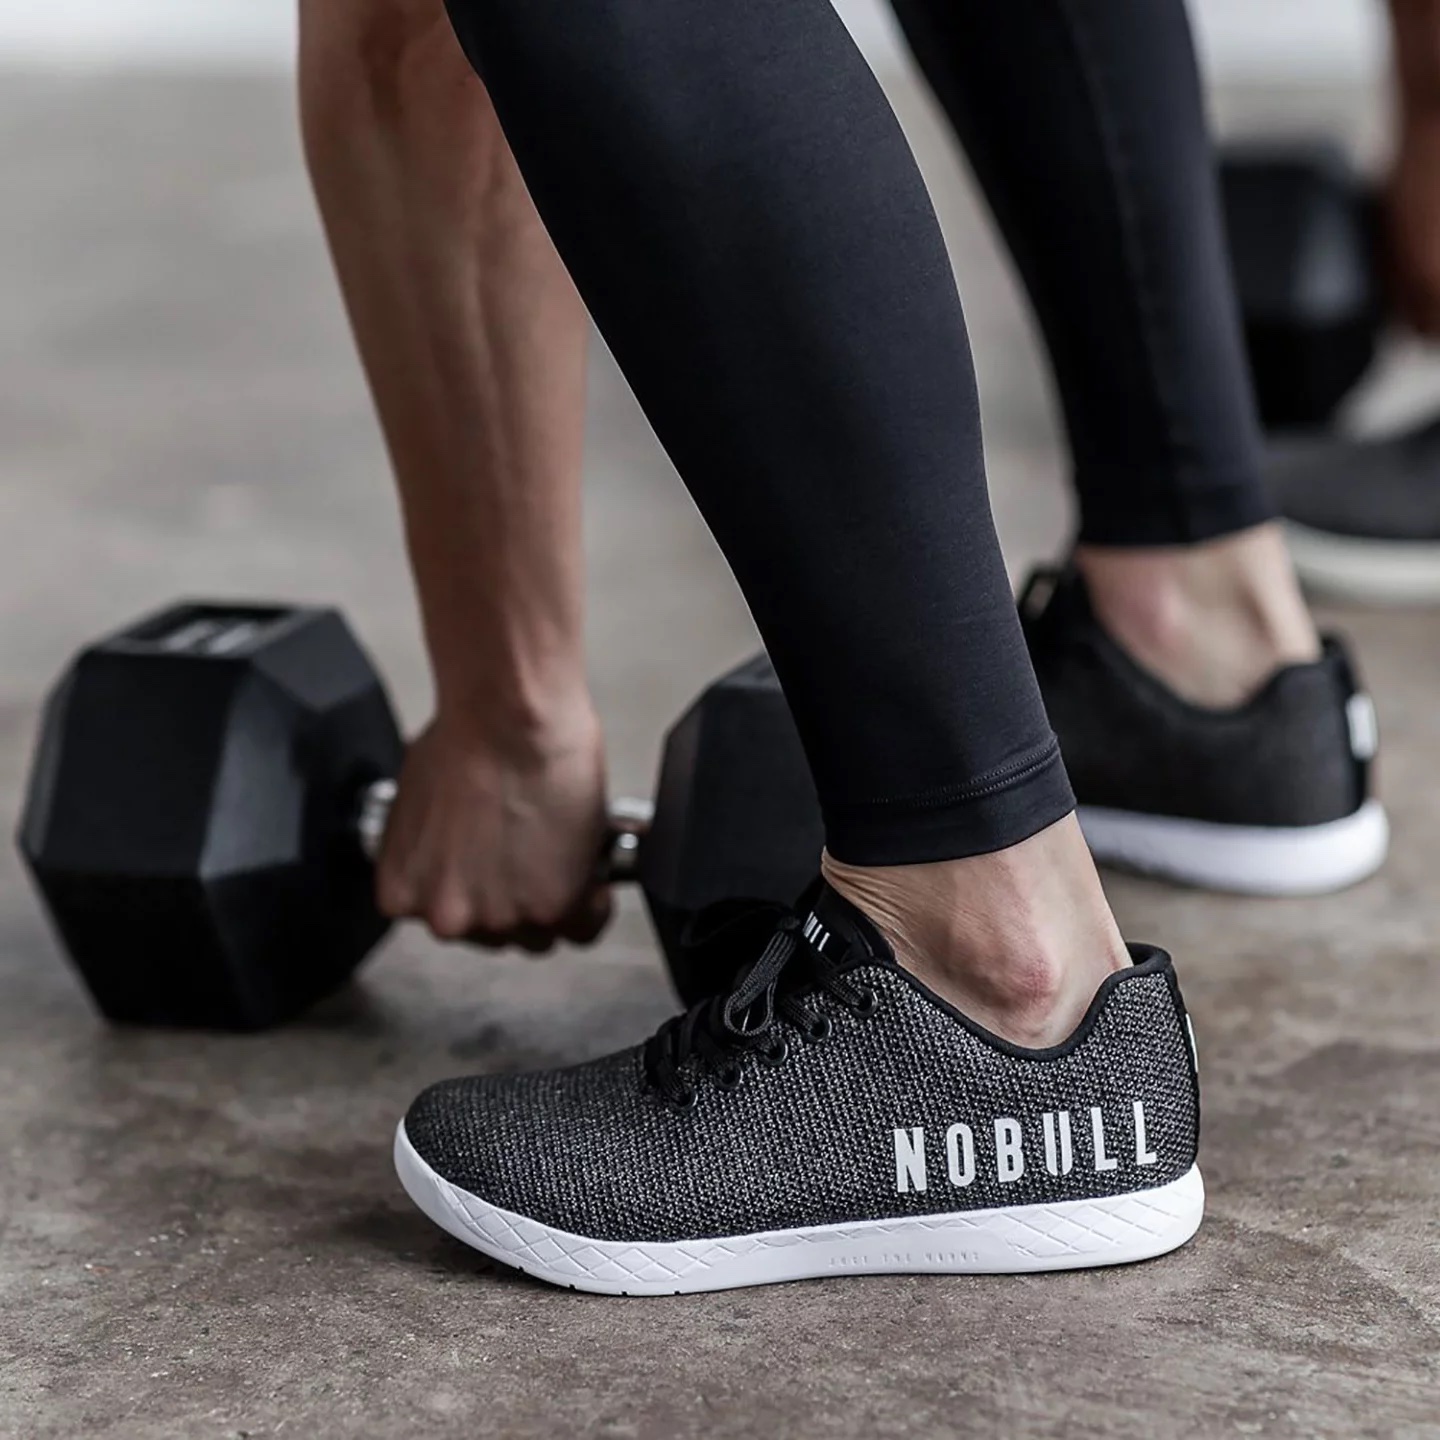 NOBULL's footwear showcases a minimalist yet striking design that captures attention. Here's why NOBULL is a great option for you.